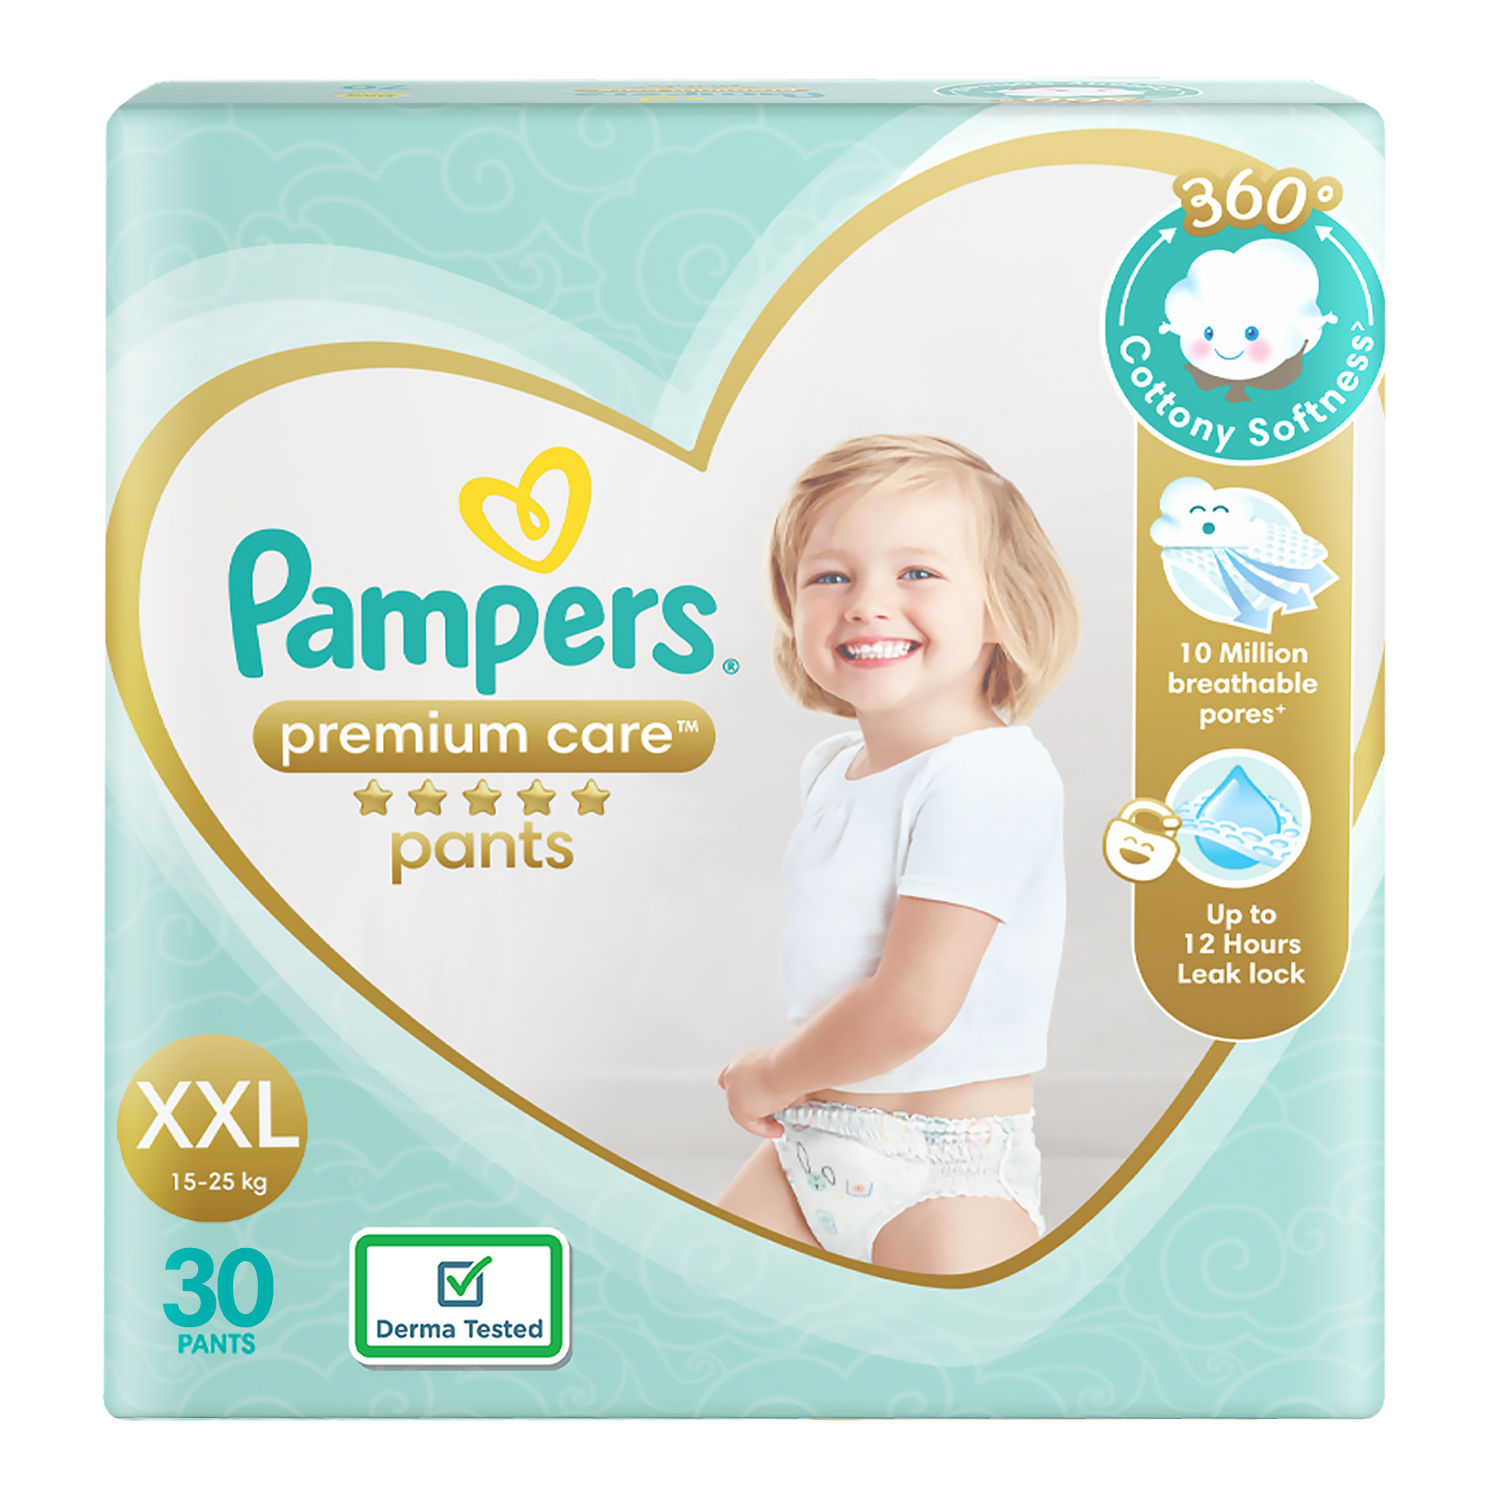 Buy Pampers Premium Care Pants Diapers, Large, 44 Count&Pampers Premium  Care Pants Diapers, XL, 24 Count Online at Low Prices in India - Amazon.in